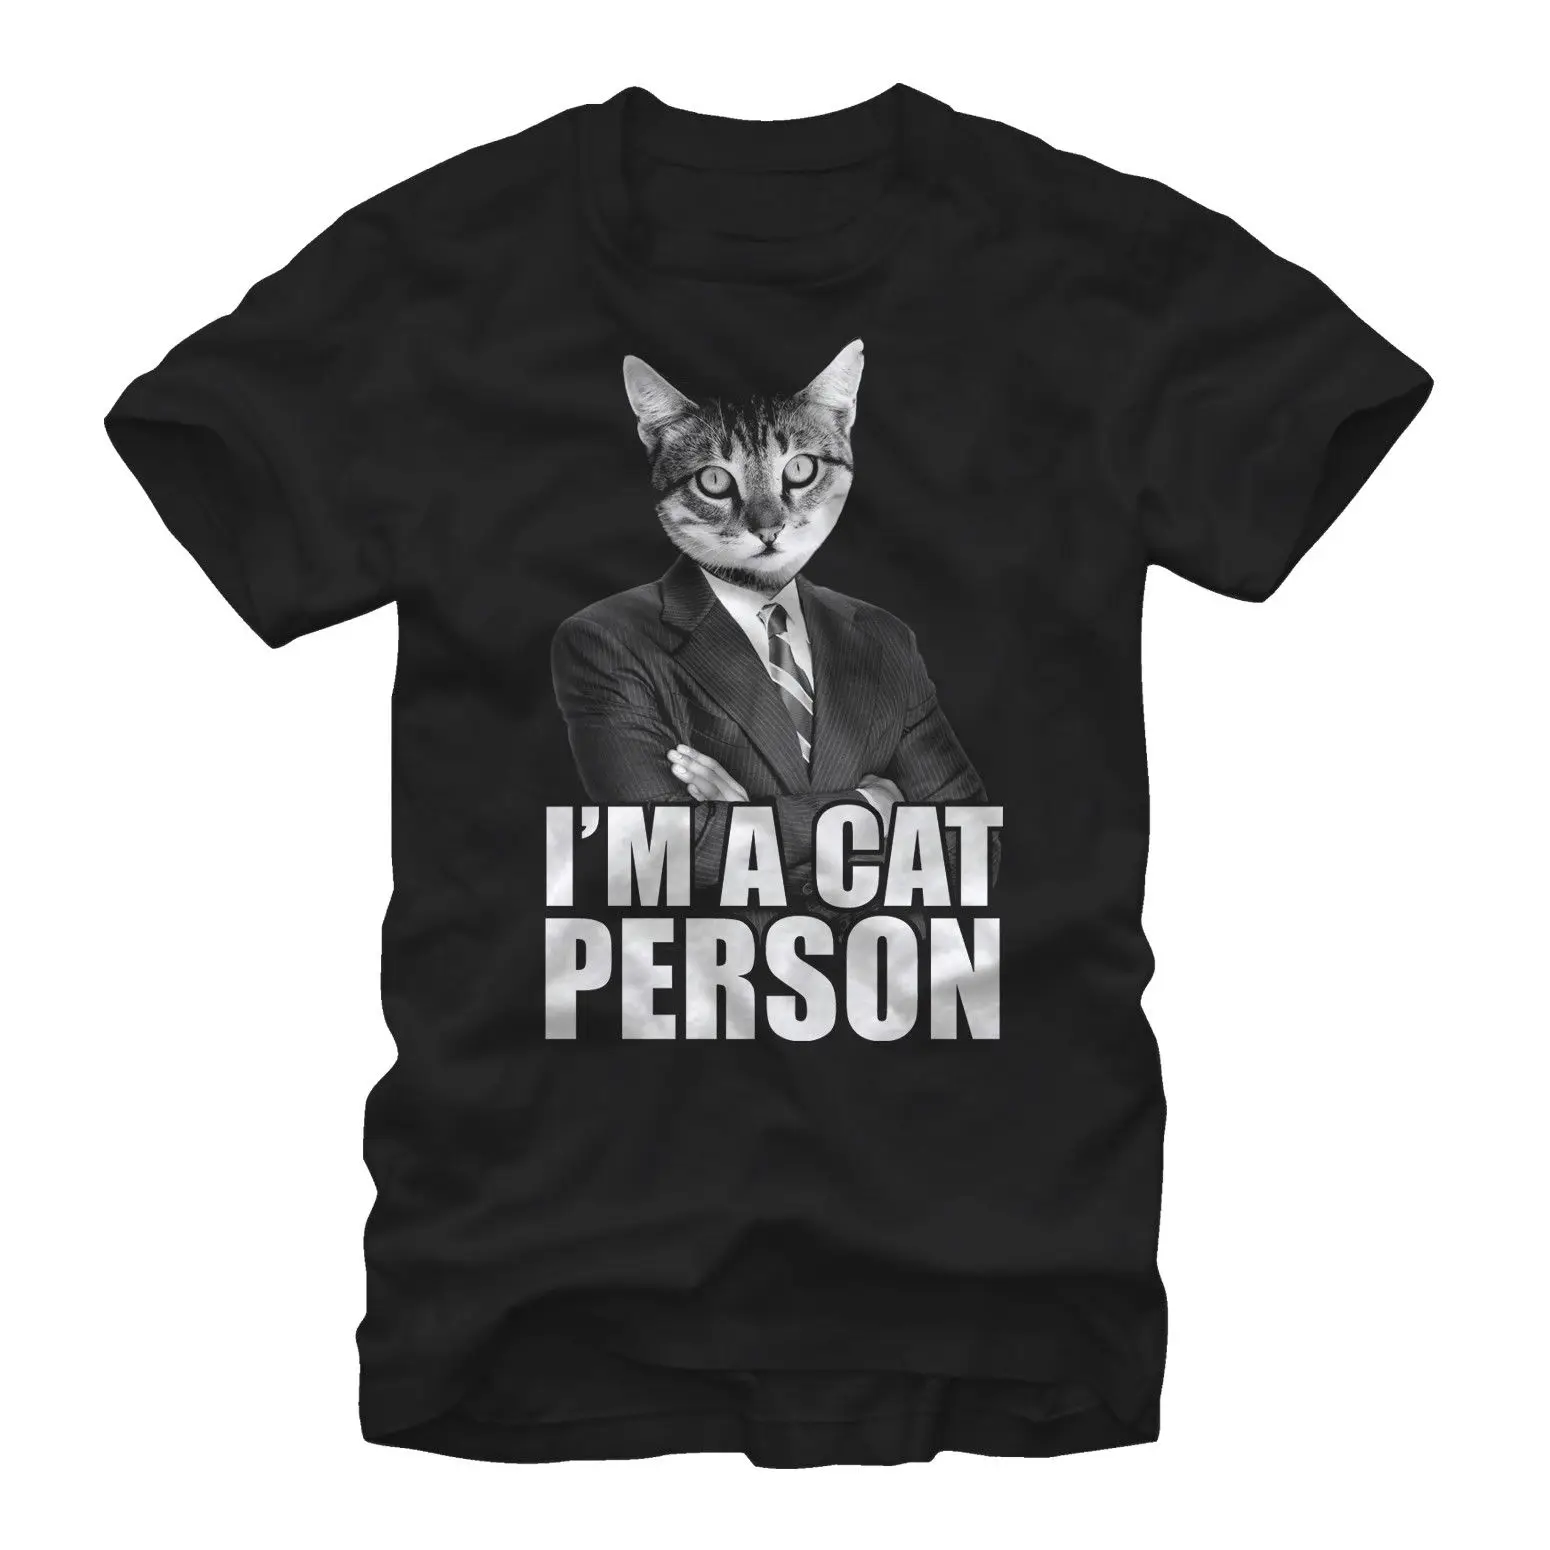 Funny I'm A Cat Person T-Shirt 100% Cotton O-Neck Summer Short Sleeve Casual Mens T-shirt Size S-3XL